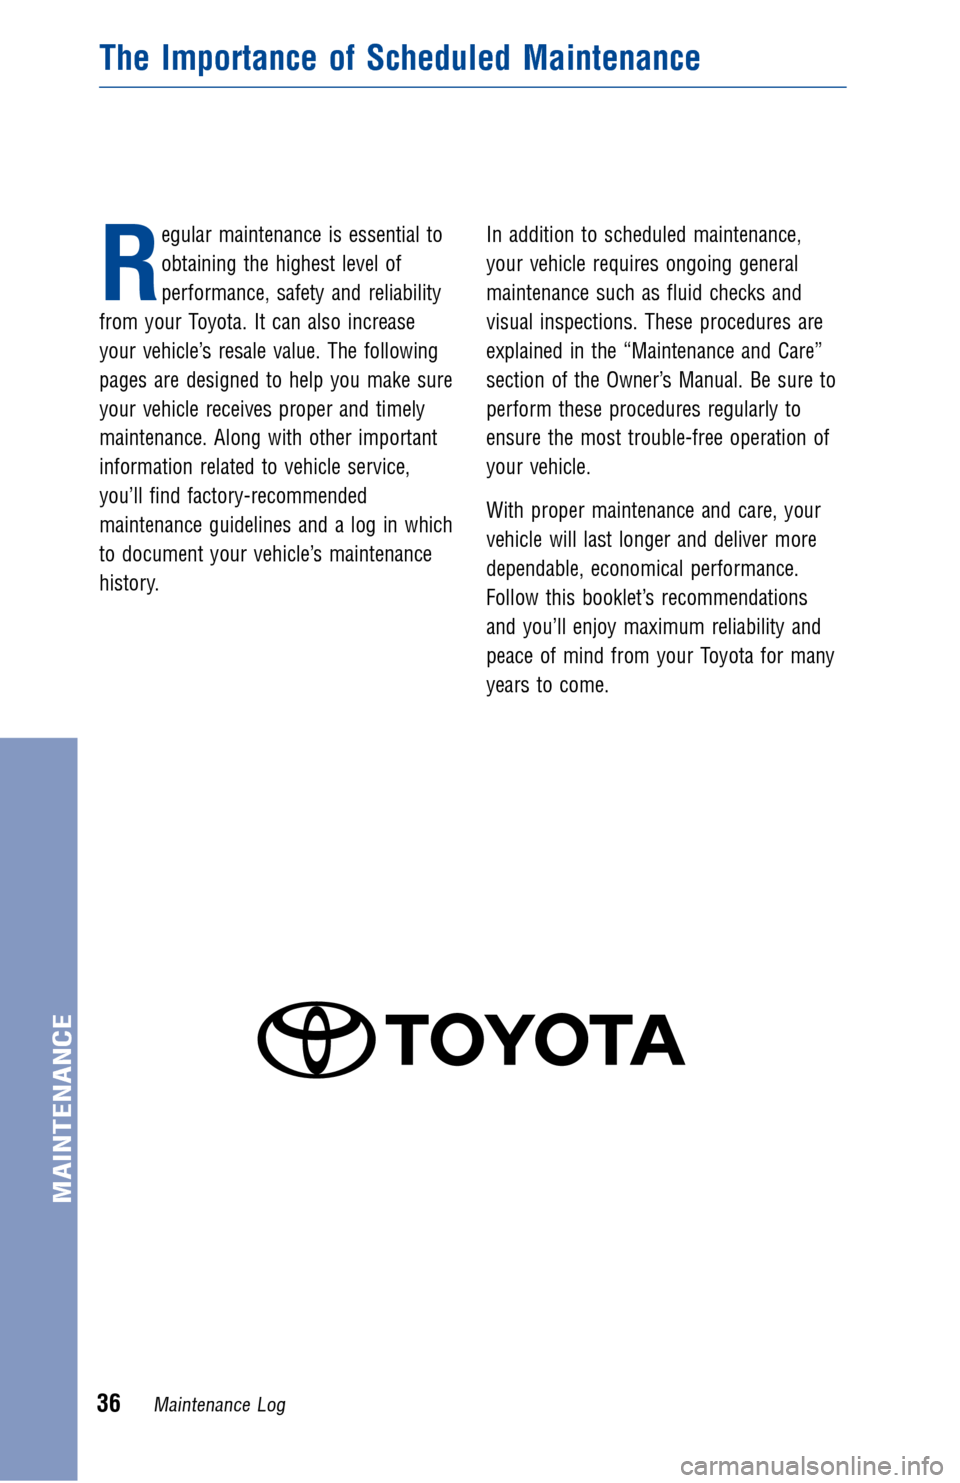 TOYOTA CAMRY HYBRID 2017 XV50 / 9.G Warranty And Maintenance Guide R
egular maintenance is essential to
obtaining the highest level of
performance, safety and reliability
from your Toyota. It can also increase
your vehicle’s resale value. The following
pages are de